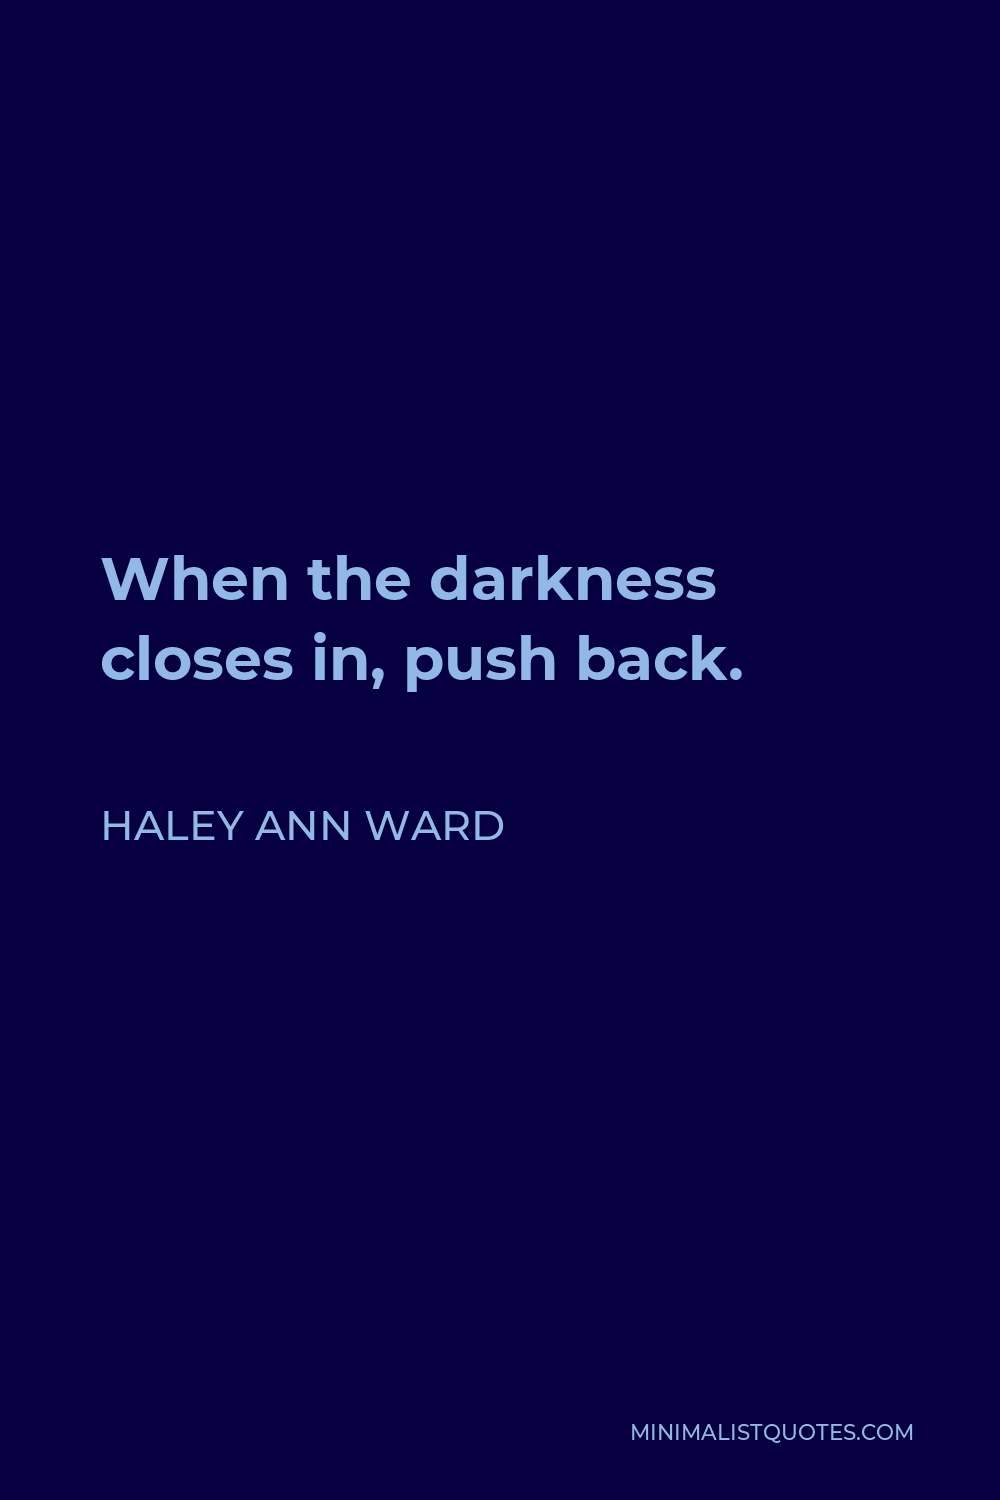 Haley Ann Ward Quote - When the darkness closes in, push back.